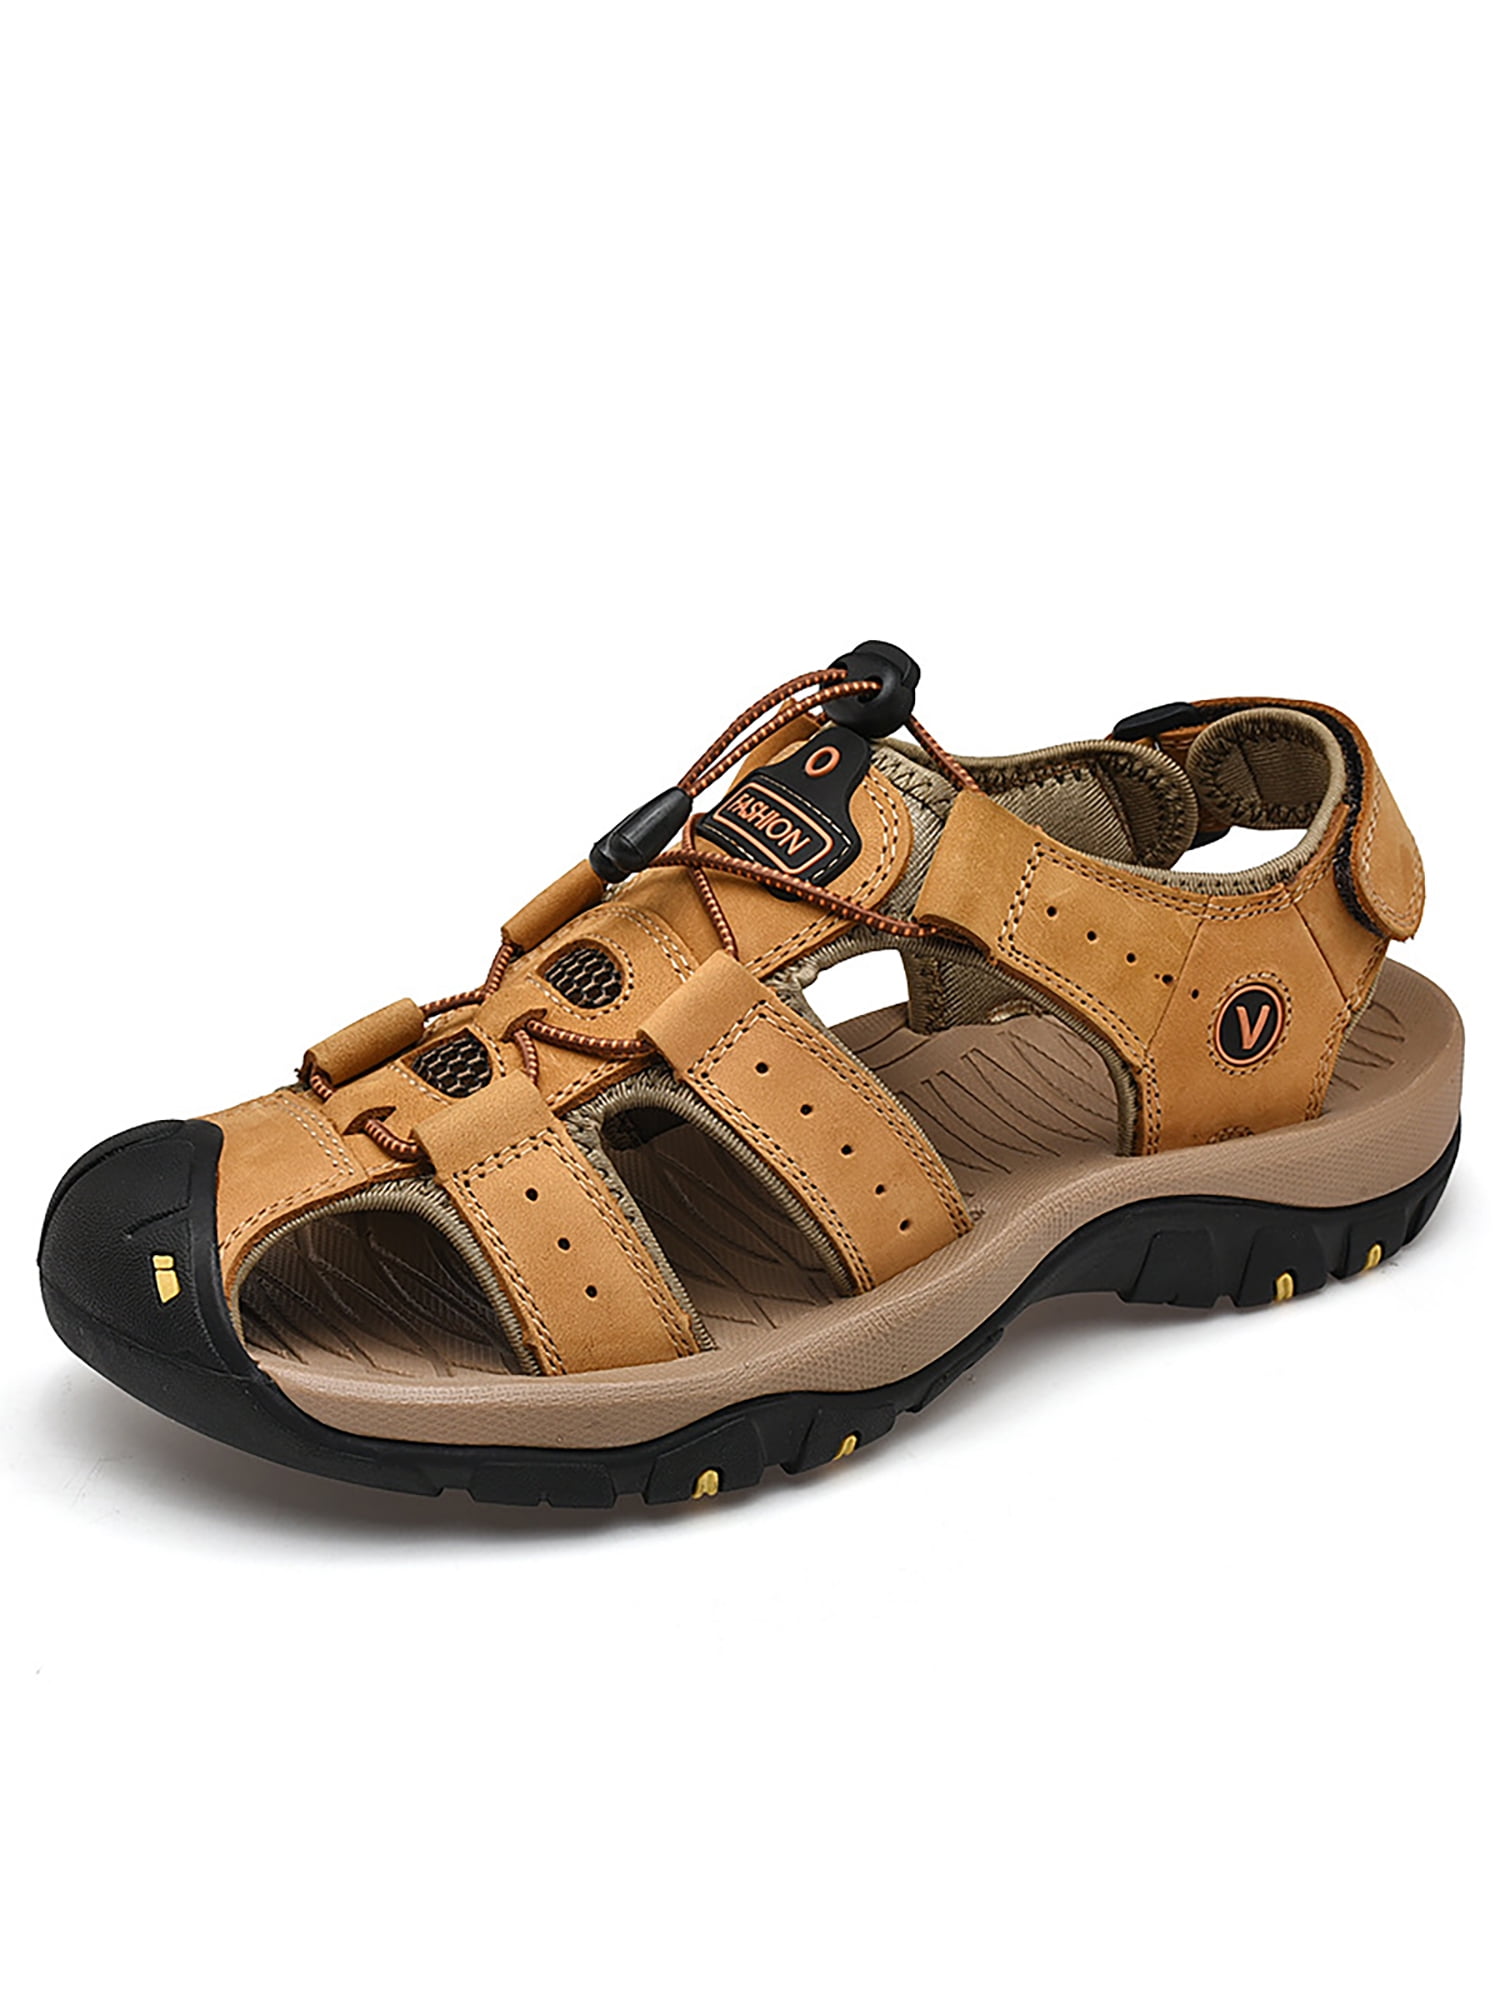 Men's Summer Hiking Comfy Leather Sandals Beach Shoes Closed Toe Fisherman New 